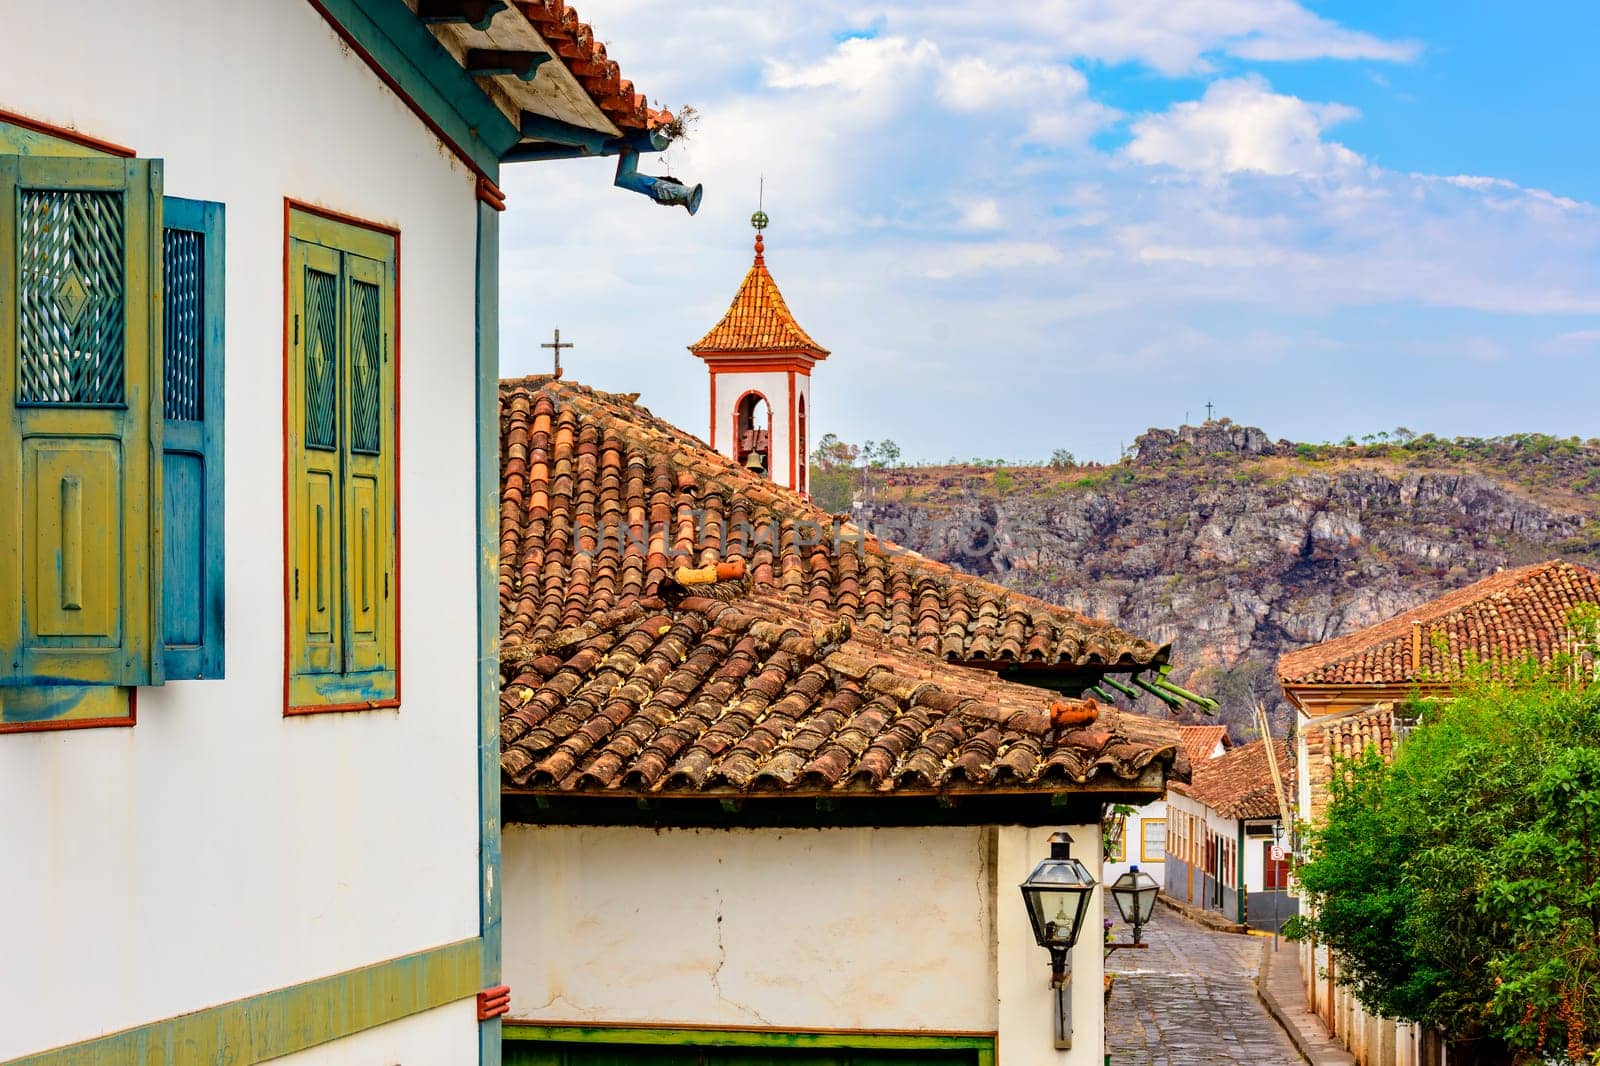 Street in the city of Diamantina with its colonial-style houses and colorful balconies with the church tower in the background